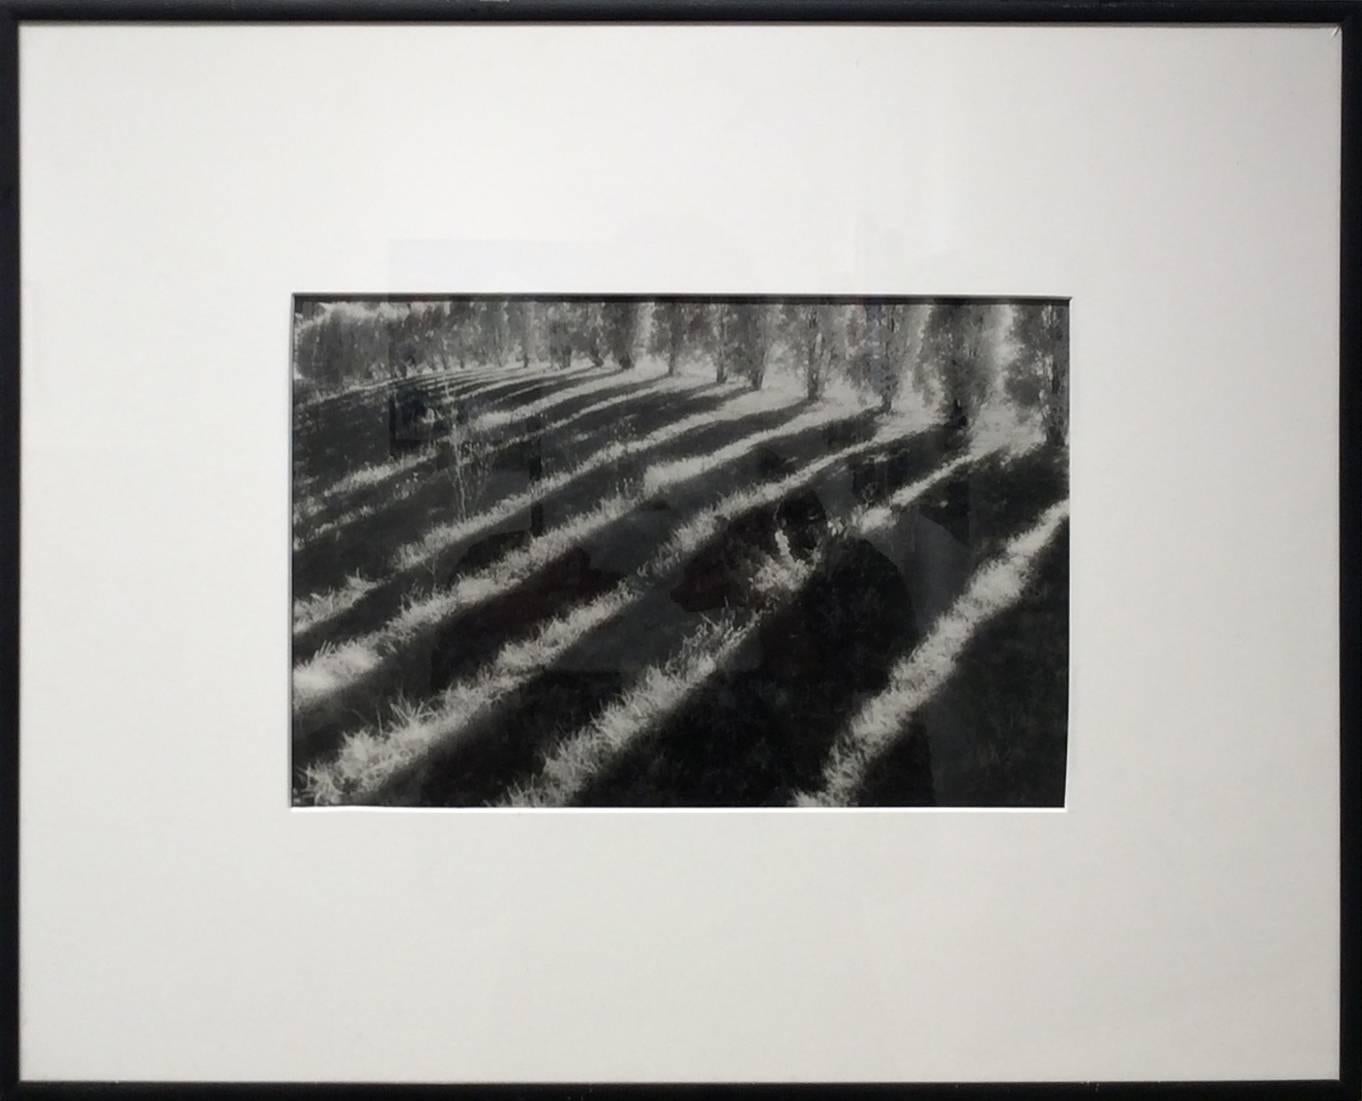 Spacial Frequency (Framed Infrared Silver Gelatin Print, Landscape) - Photograph by Susan Myers